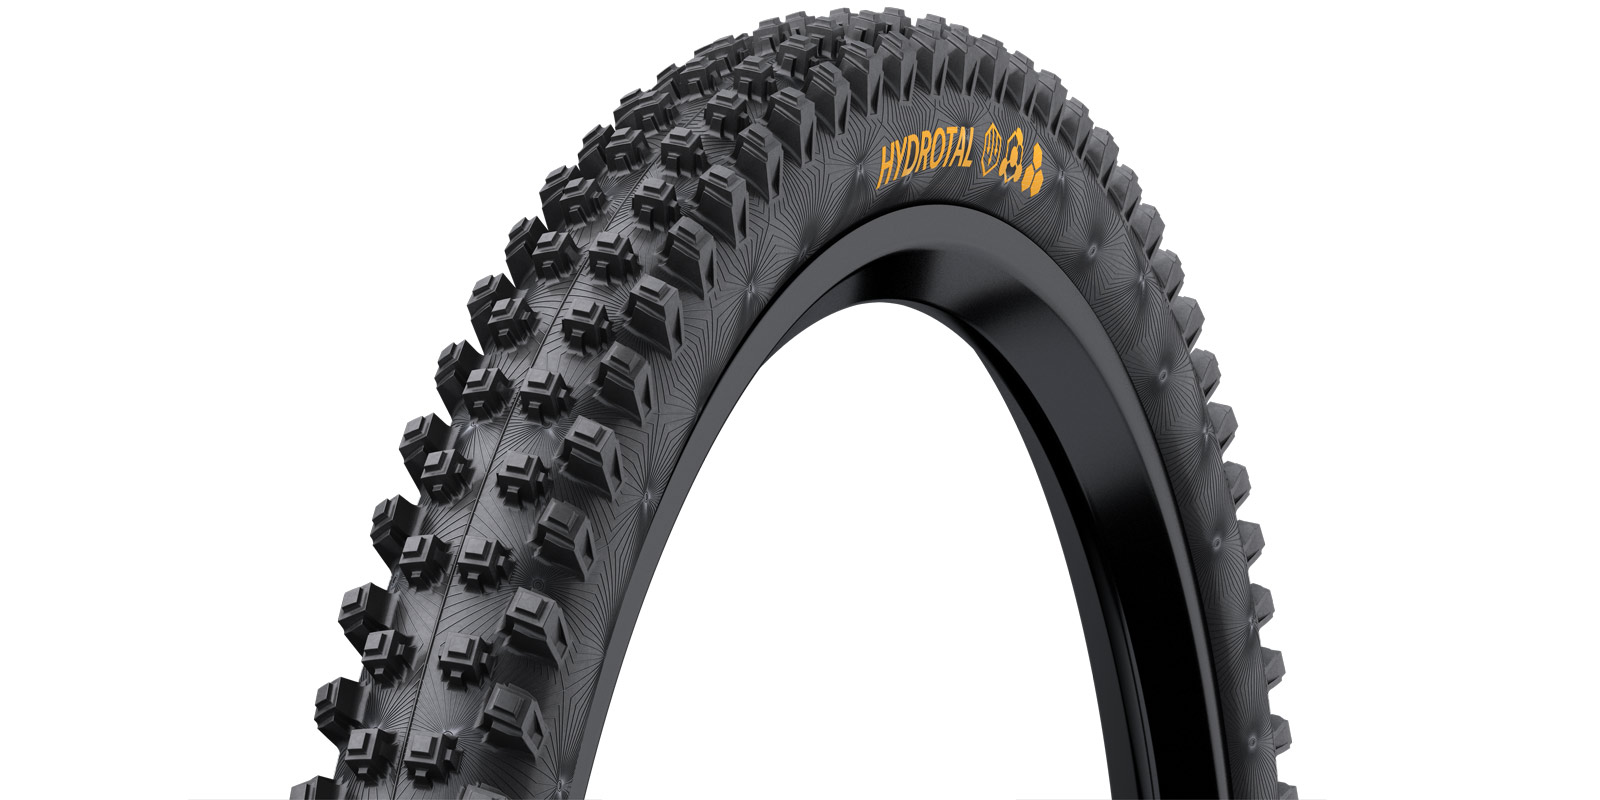 continental hydrotal wet conditions mountain bike tire mud spikes